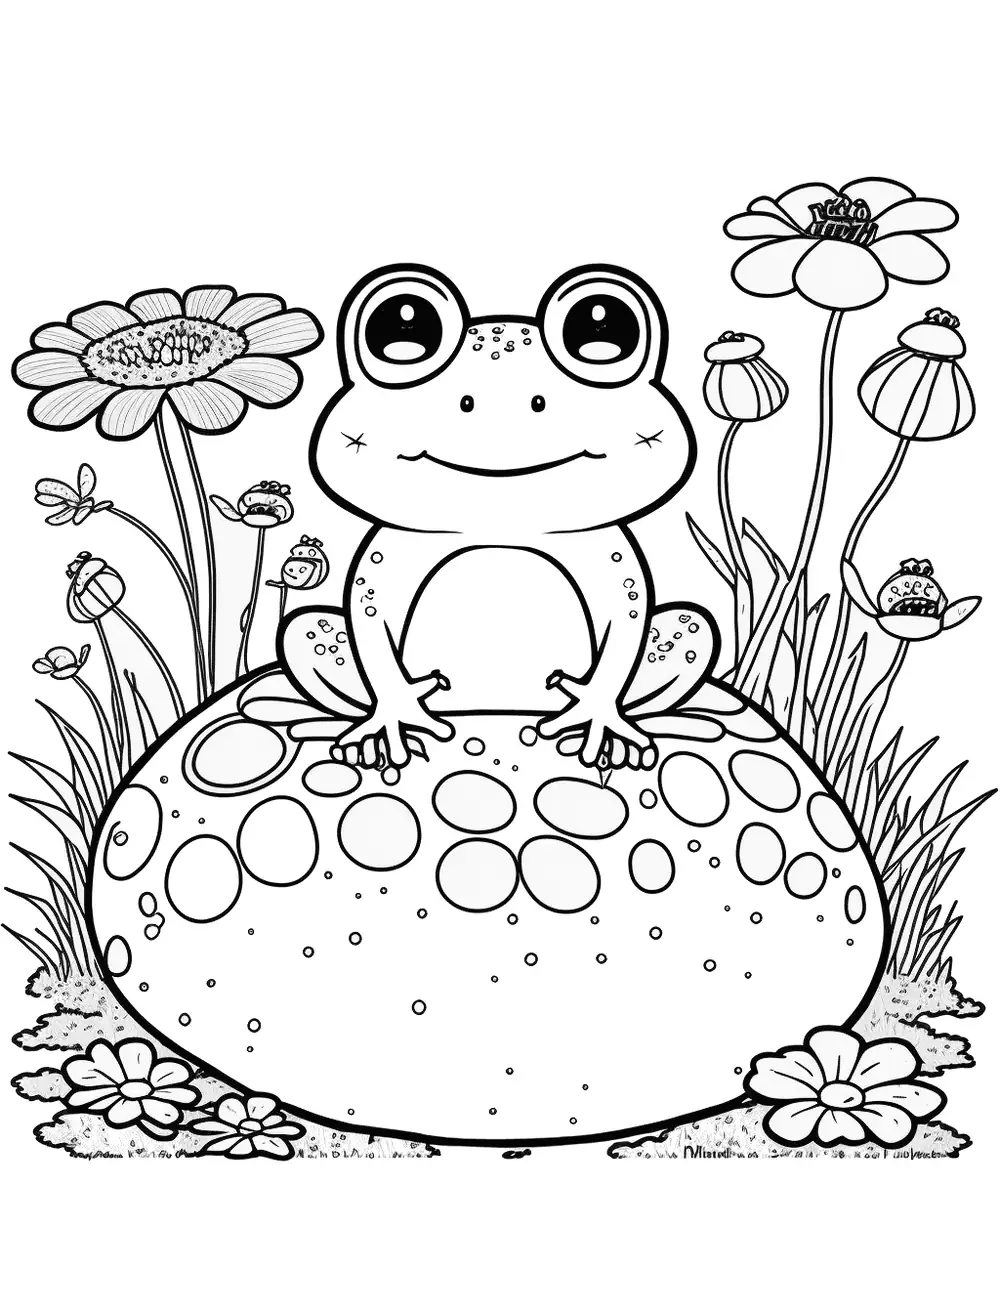 Toad In a Mushroom Frog Coloring Page - A toad sitting on a mushroom, surrounded by flowers and insects.